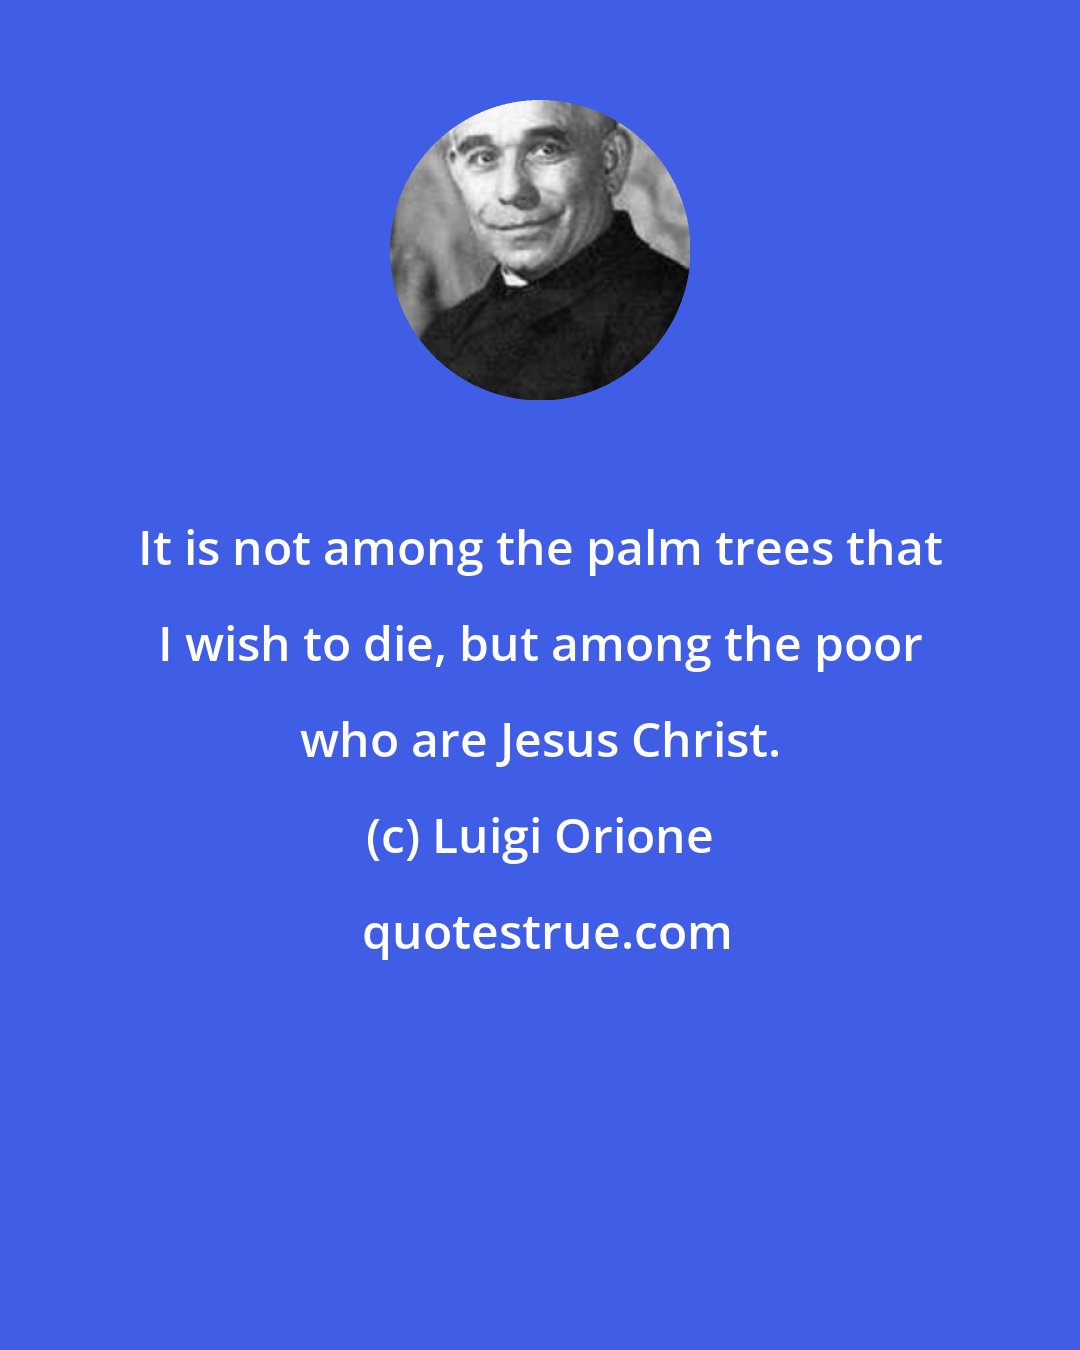 Luigi Orione: It is not among the palm trees that I wish to die, but among the poor who are Jesus Christ.